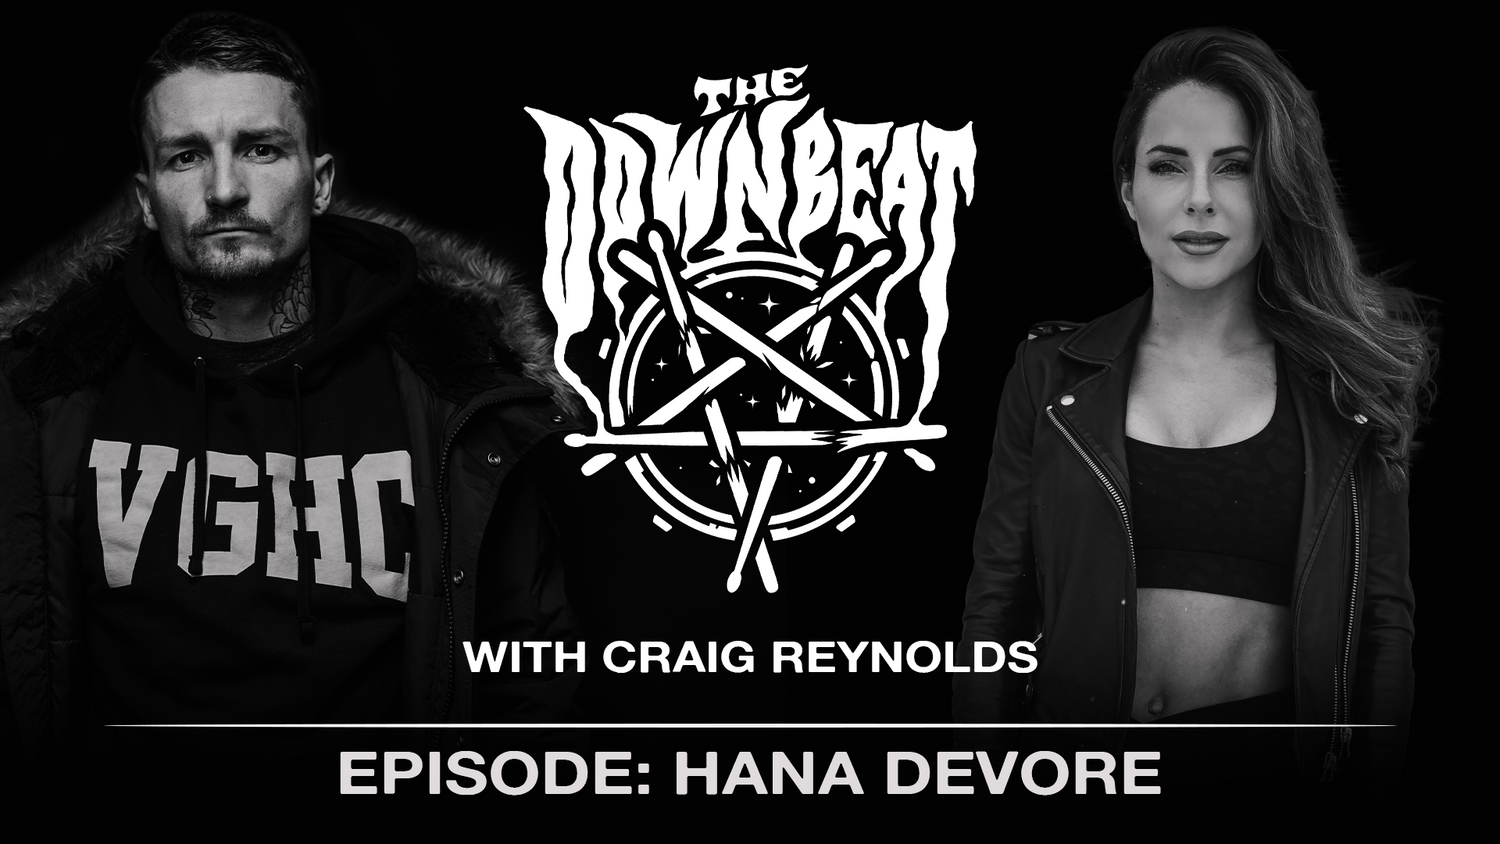 Hana Devore drops in on The Downbeat Podcast to talk biohacking, super strong weed, and achieving fitness naturally